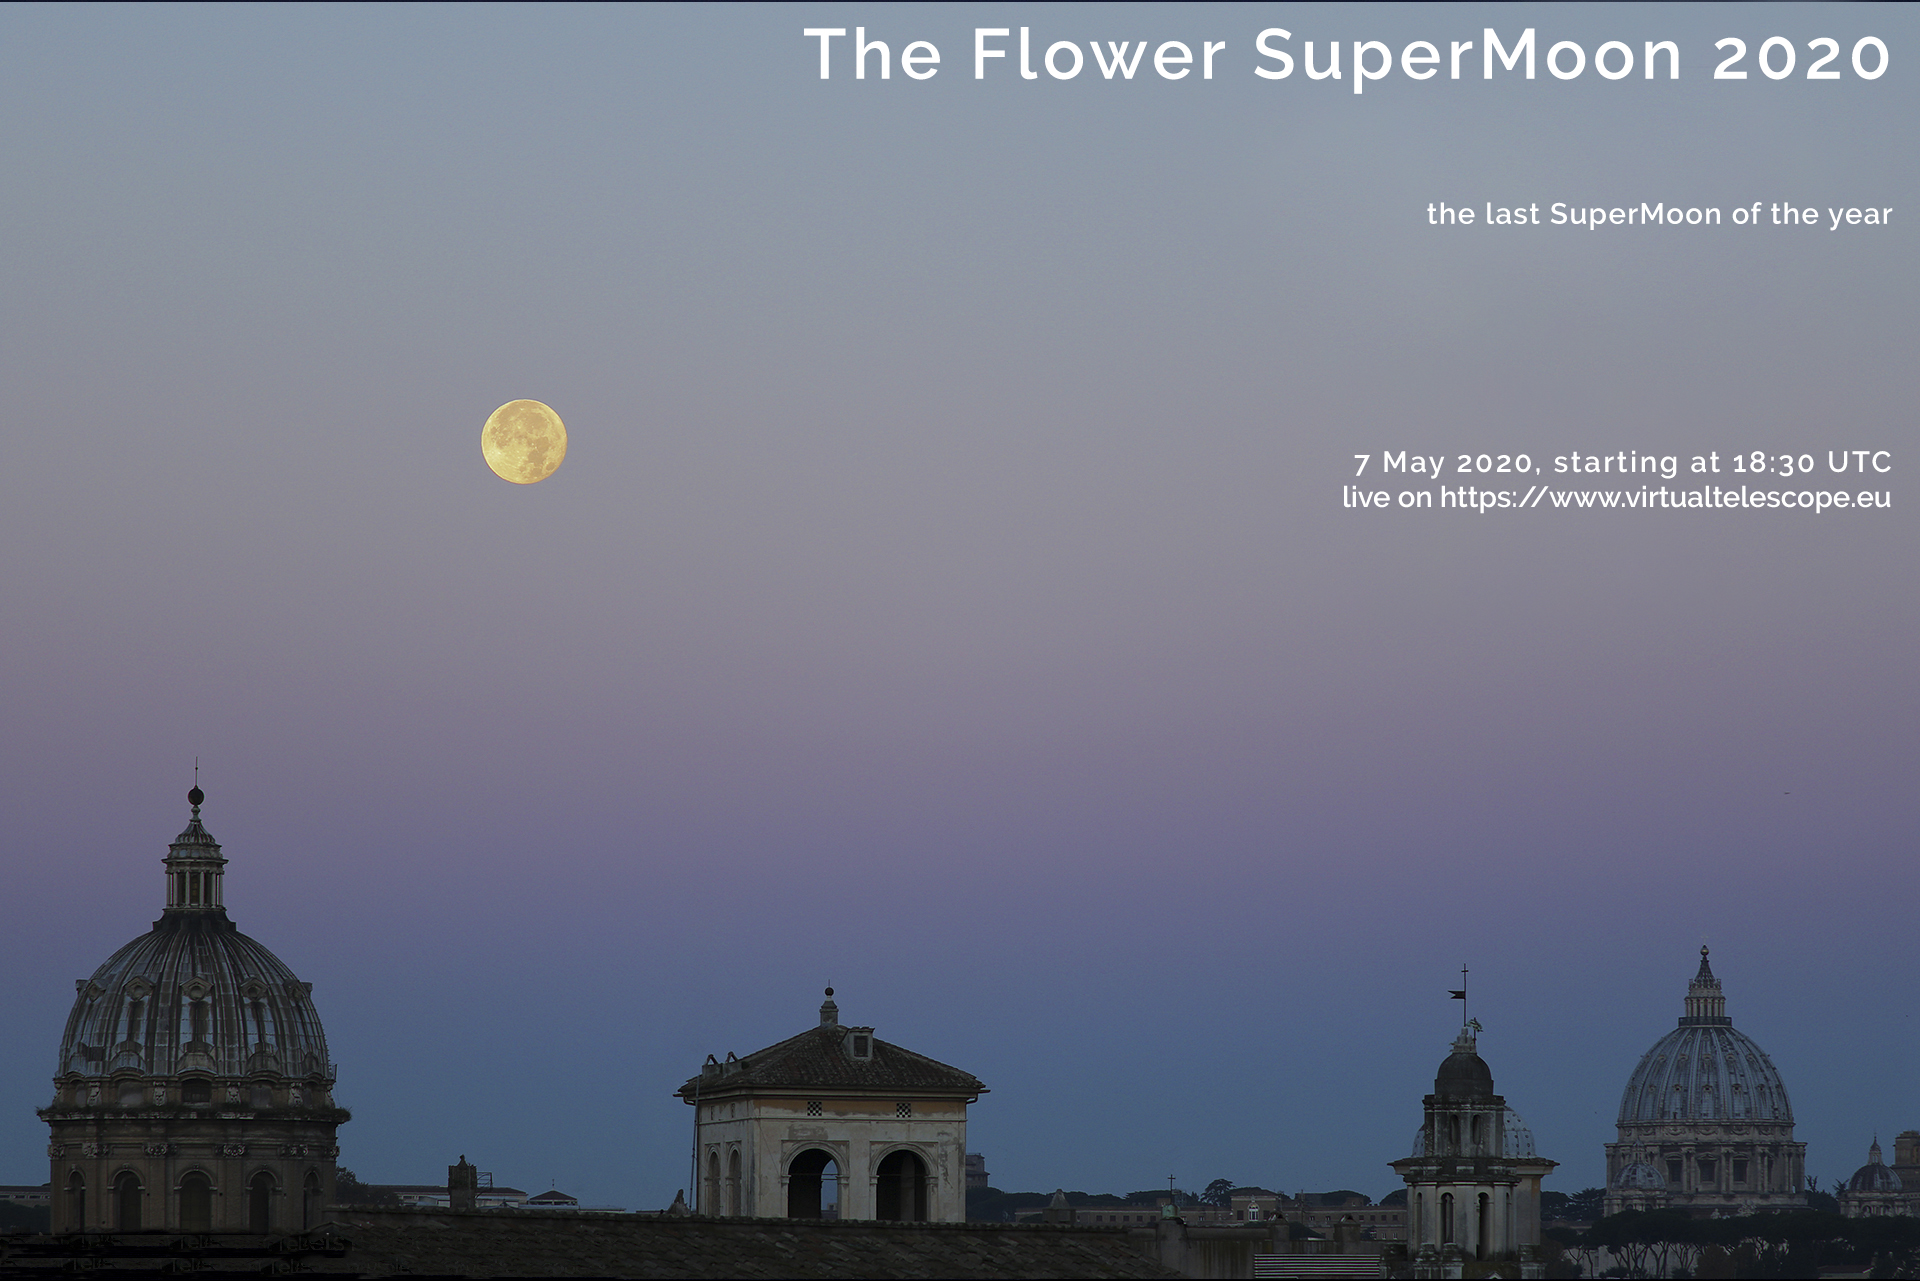 The Flower SuperMoon 2020: poster of the event